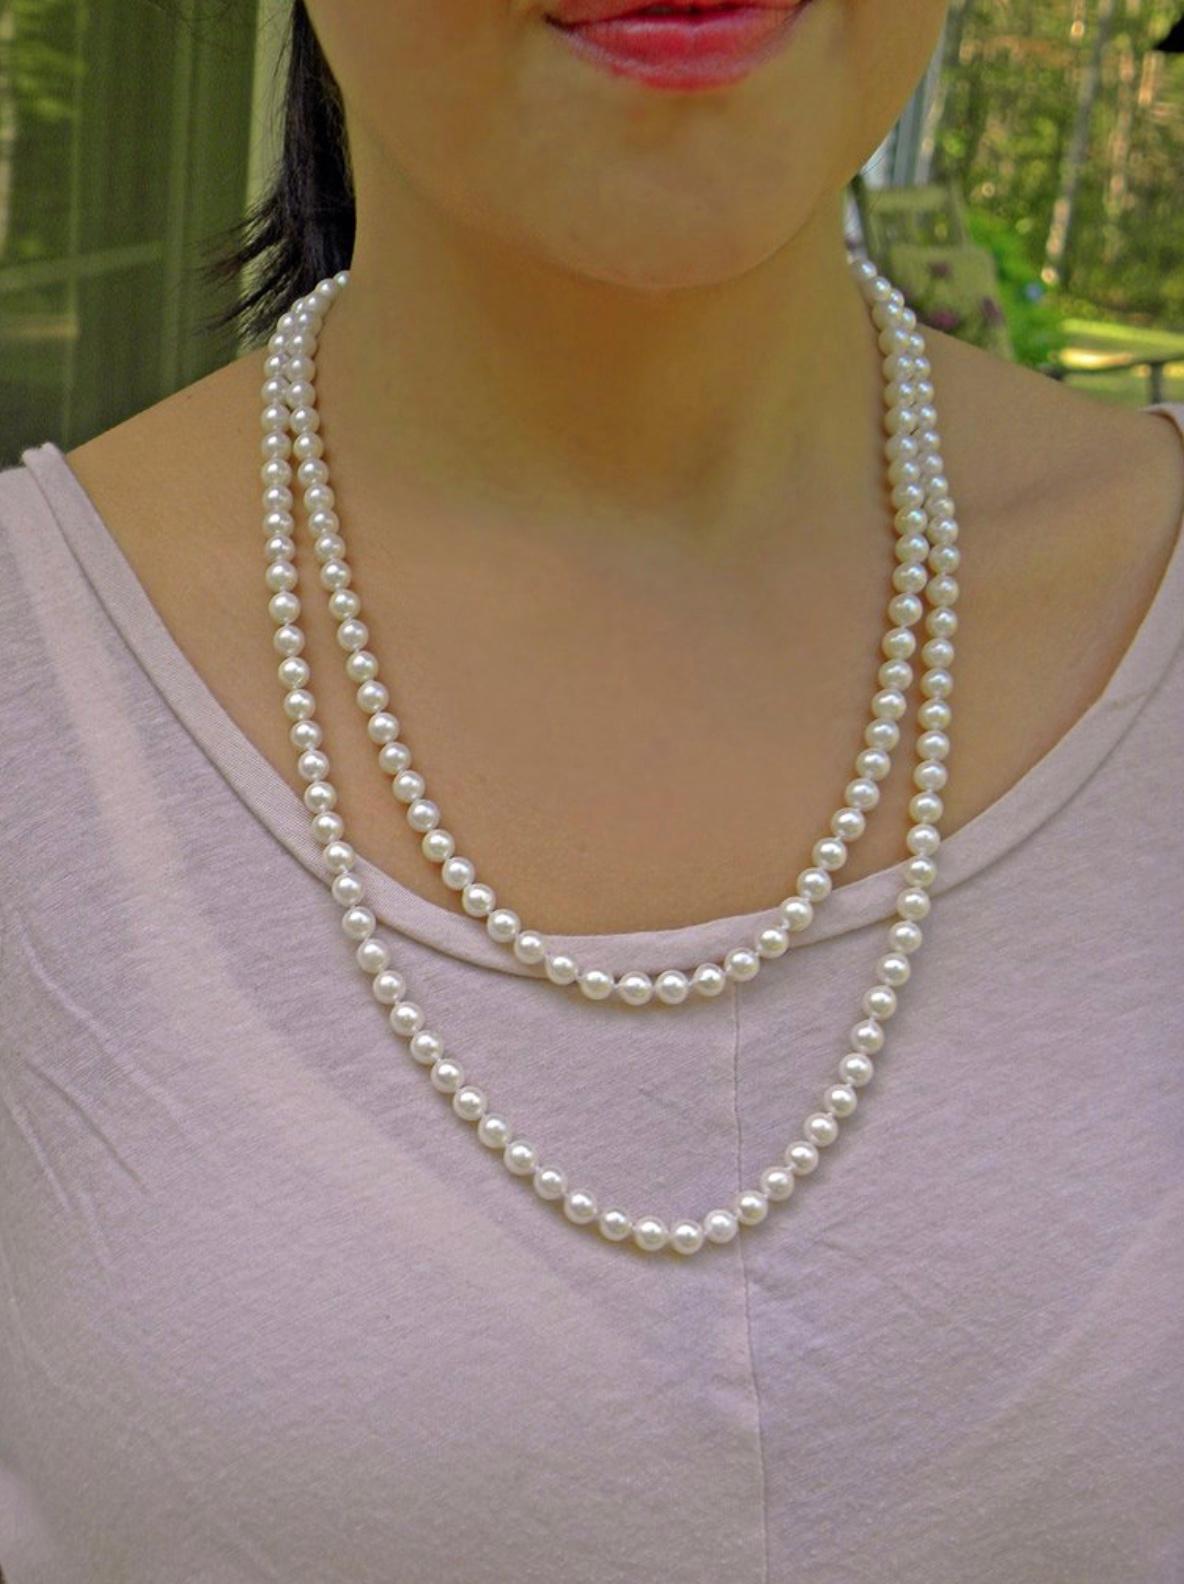 Contemporary Japanese Akoya Pearl Necklace,  48 Inches